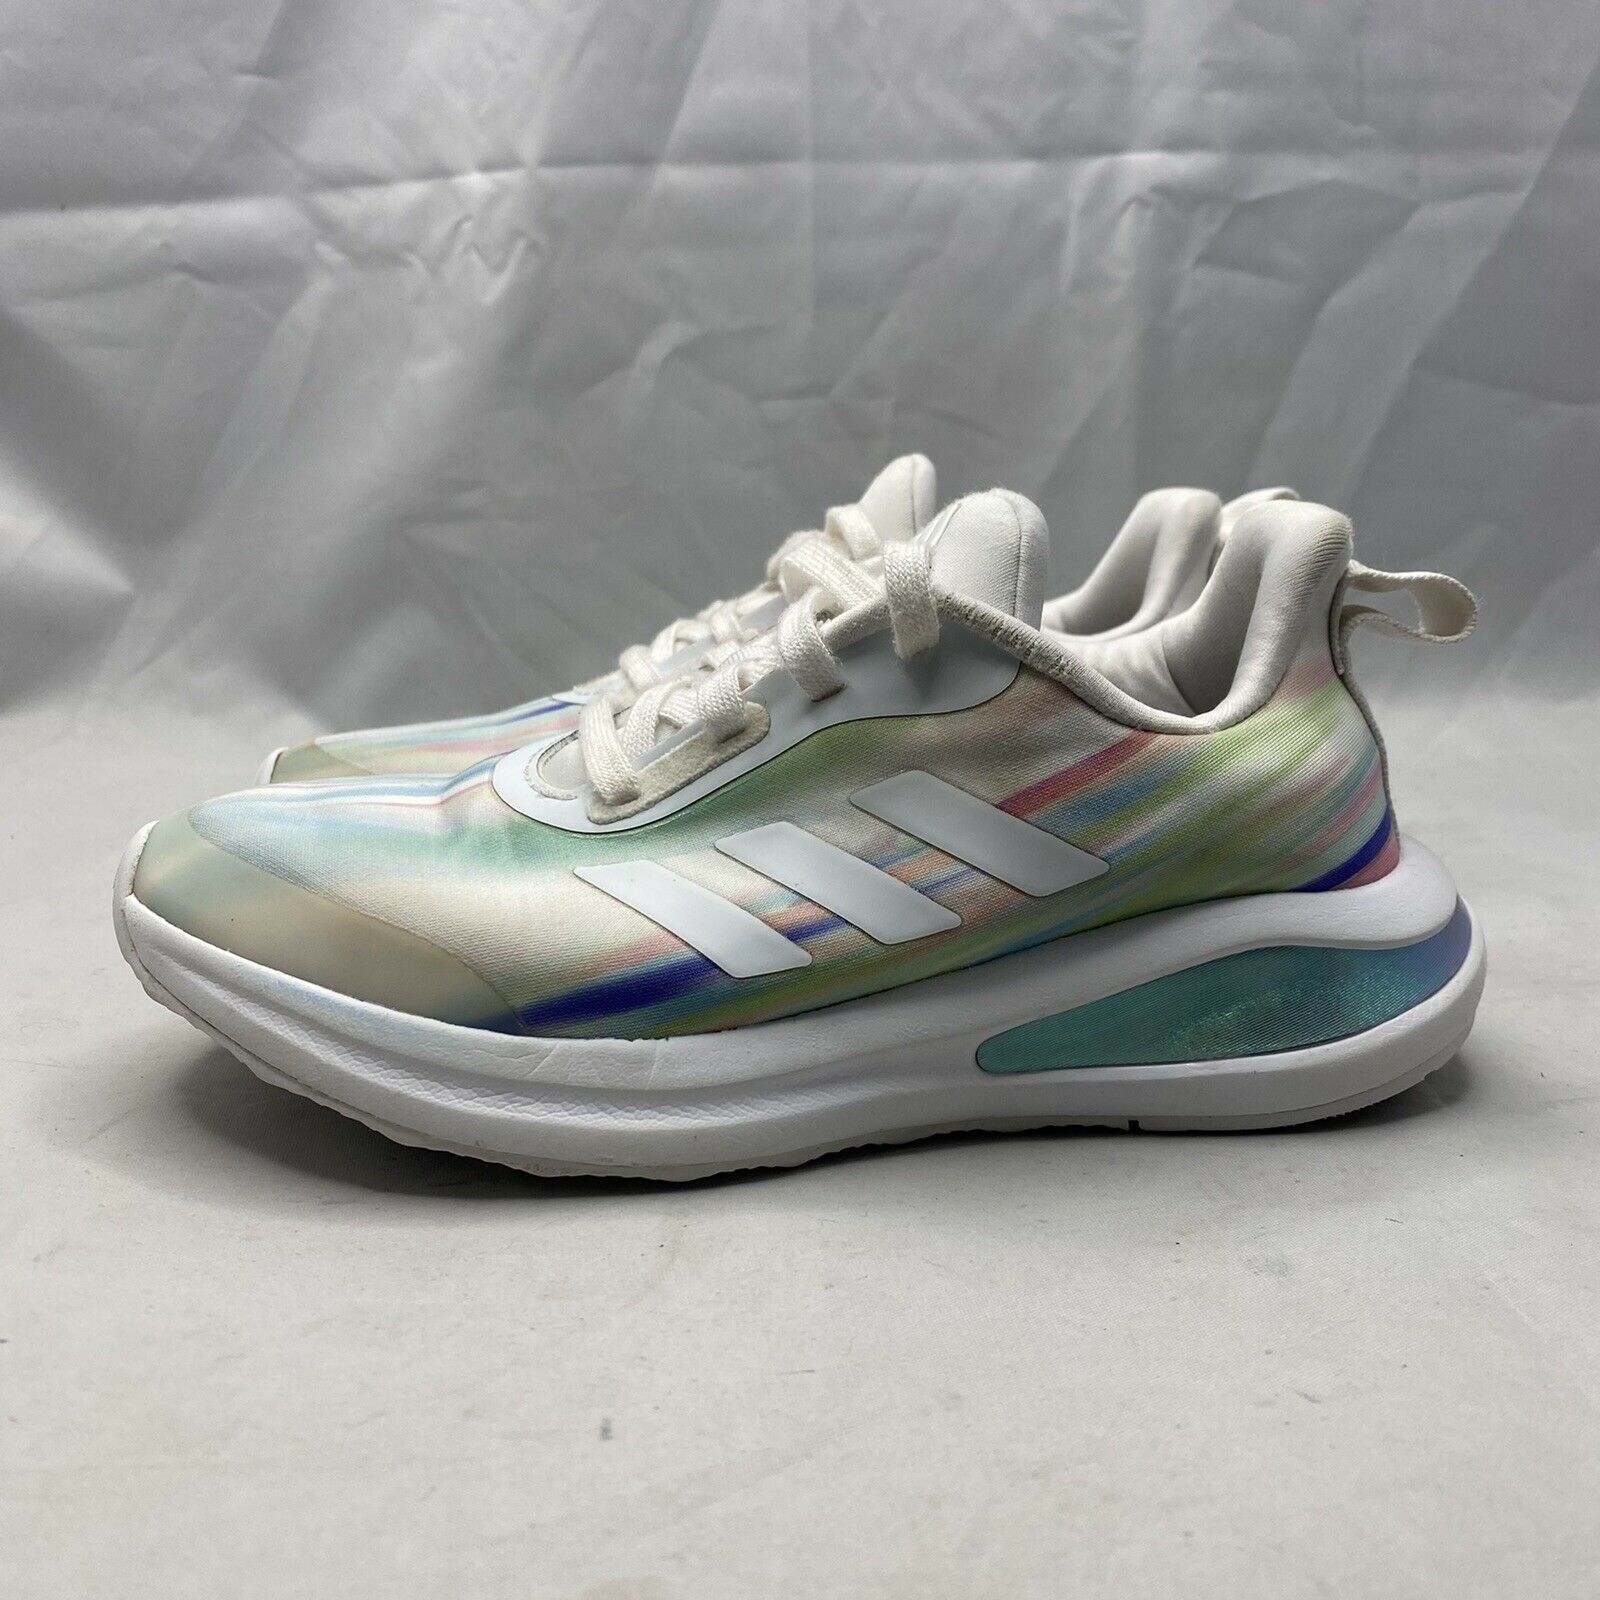 Adidas Fortarun J Graphic Multicolor White Running Shoes Sneakers Youth Size 1